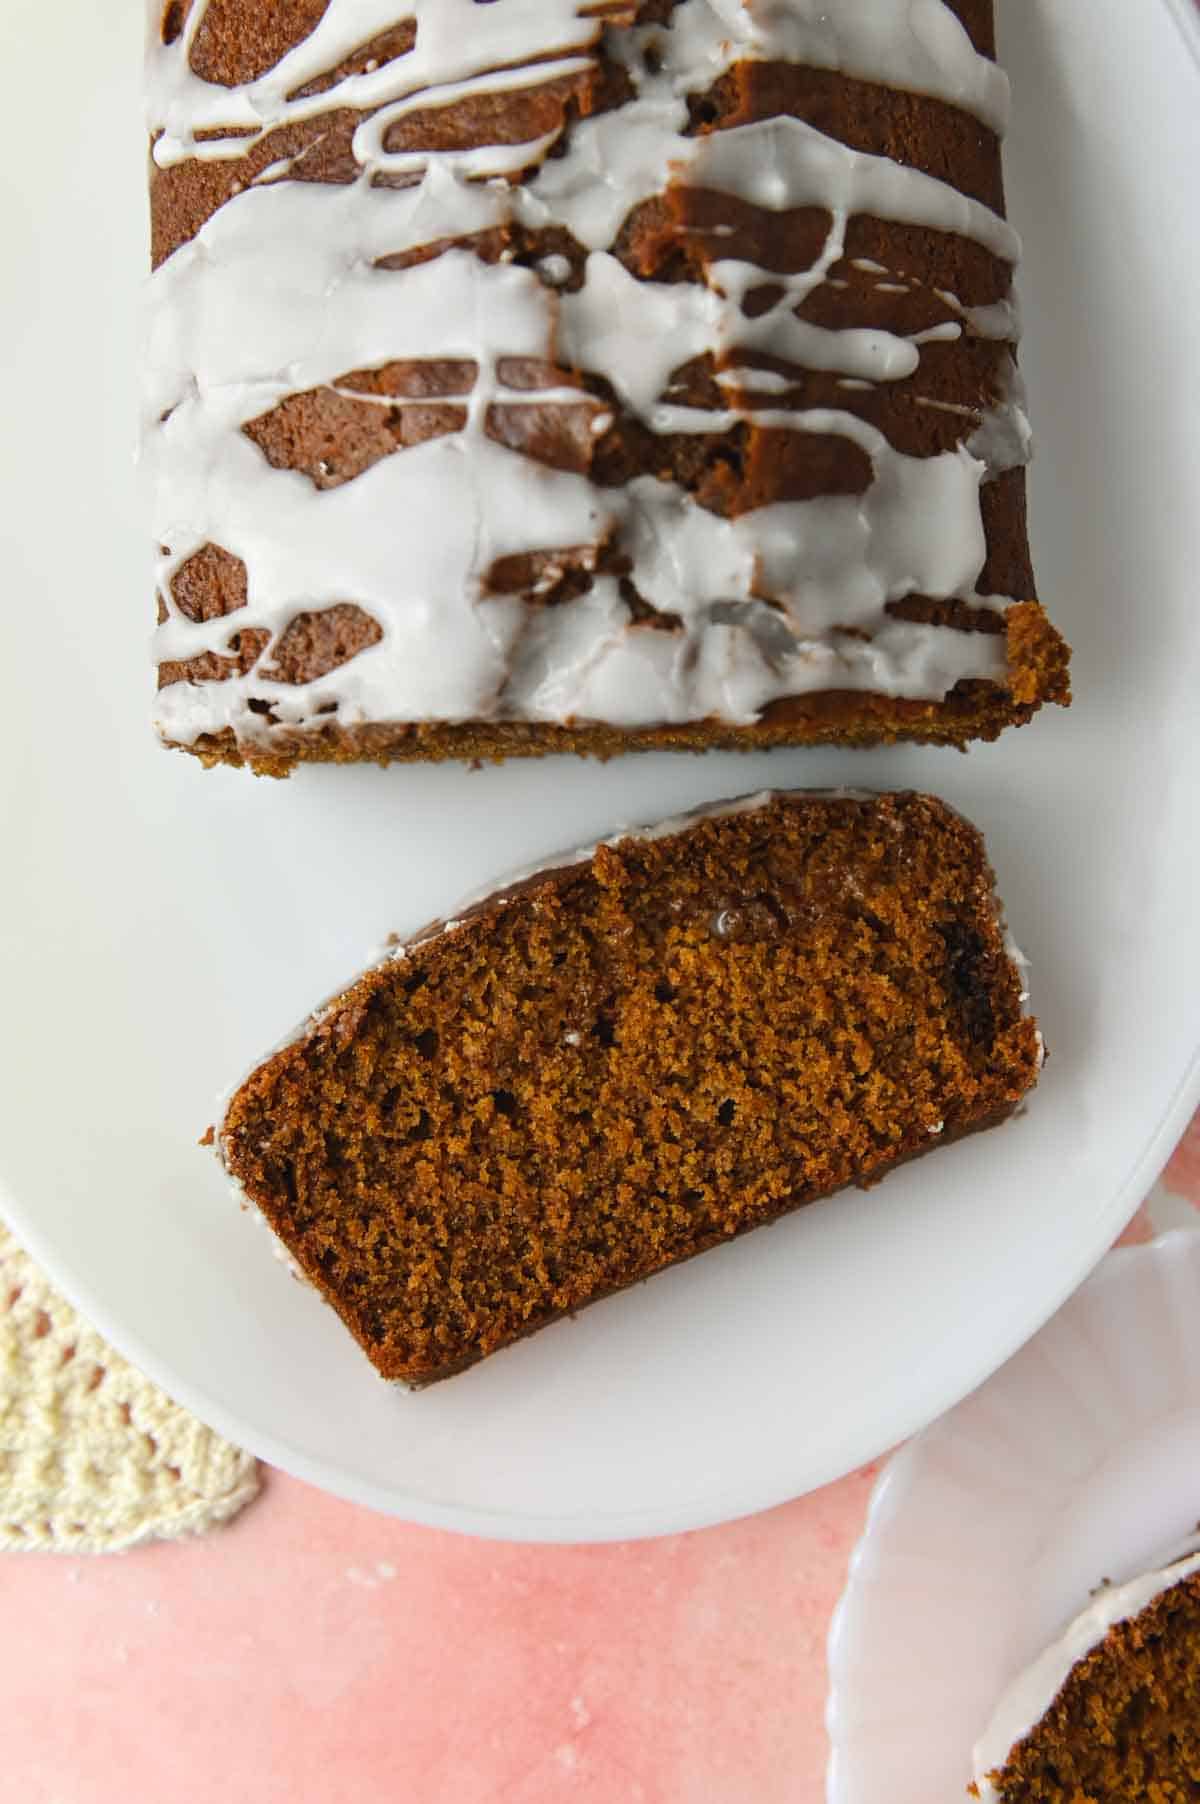 Slice of gingerbread loaf next to gingerbread on a white oval plate.